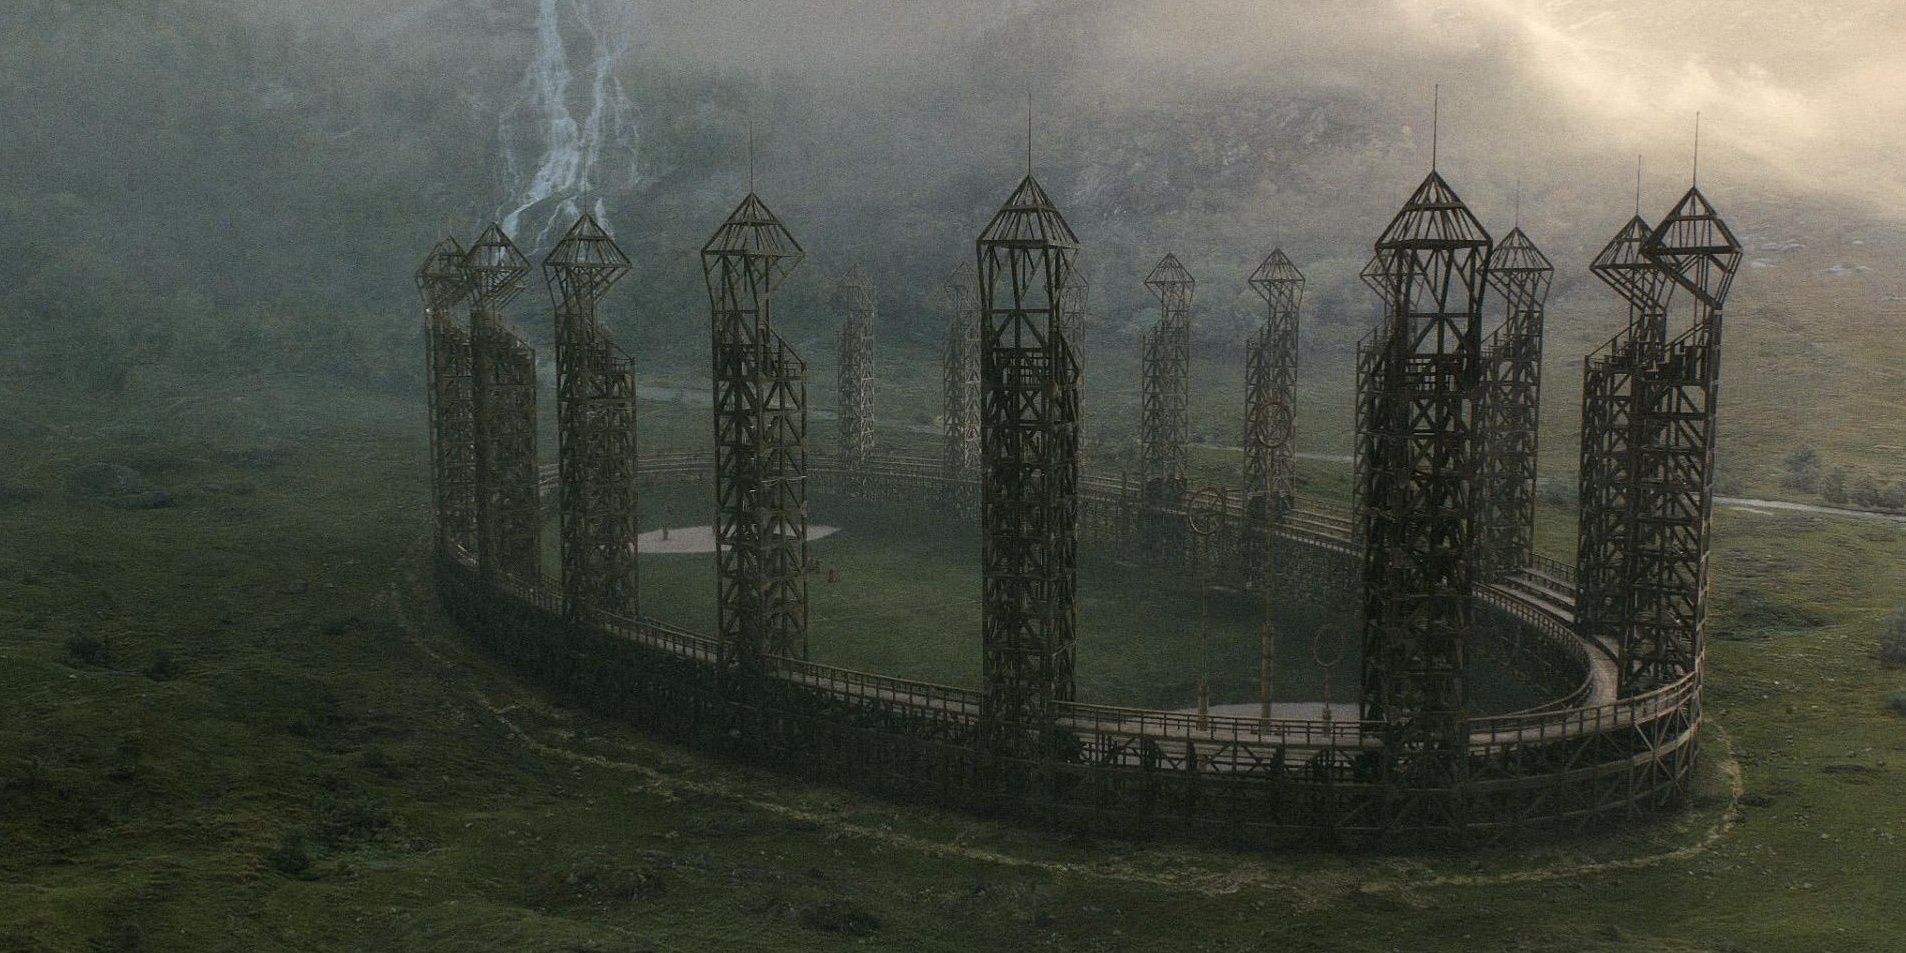 An image of the Quidditch stadium in Harry Potter